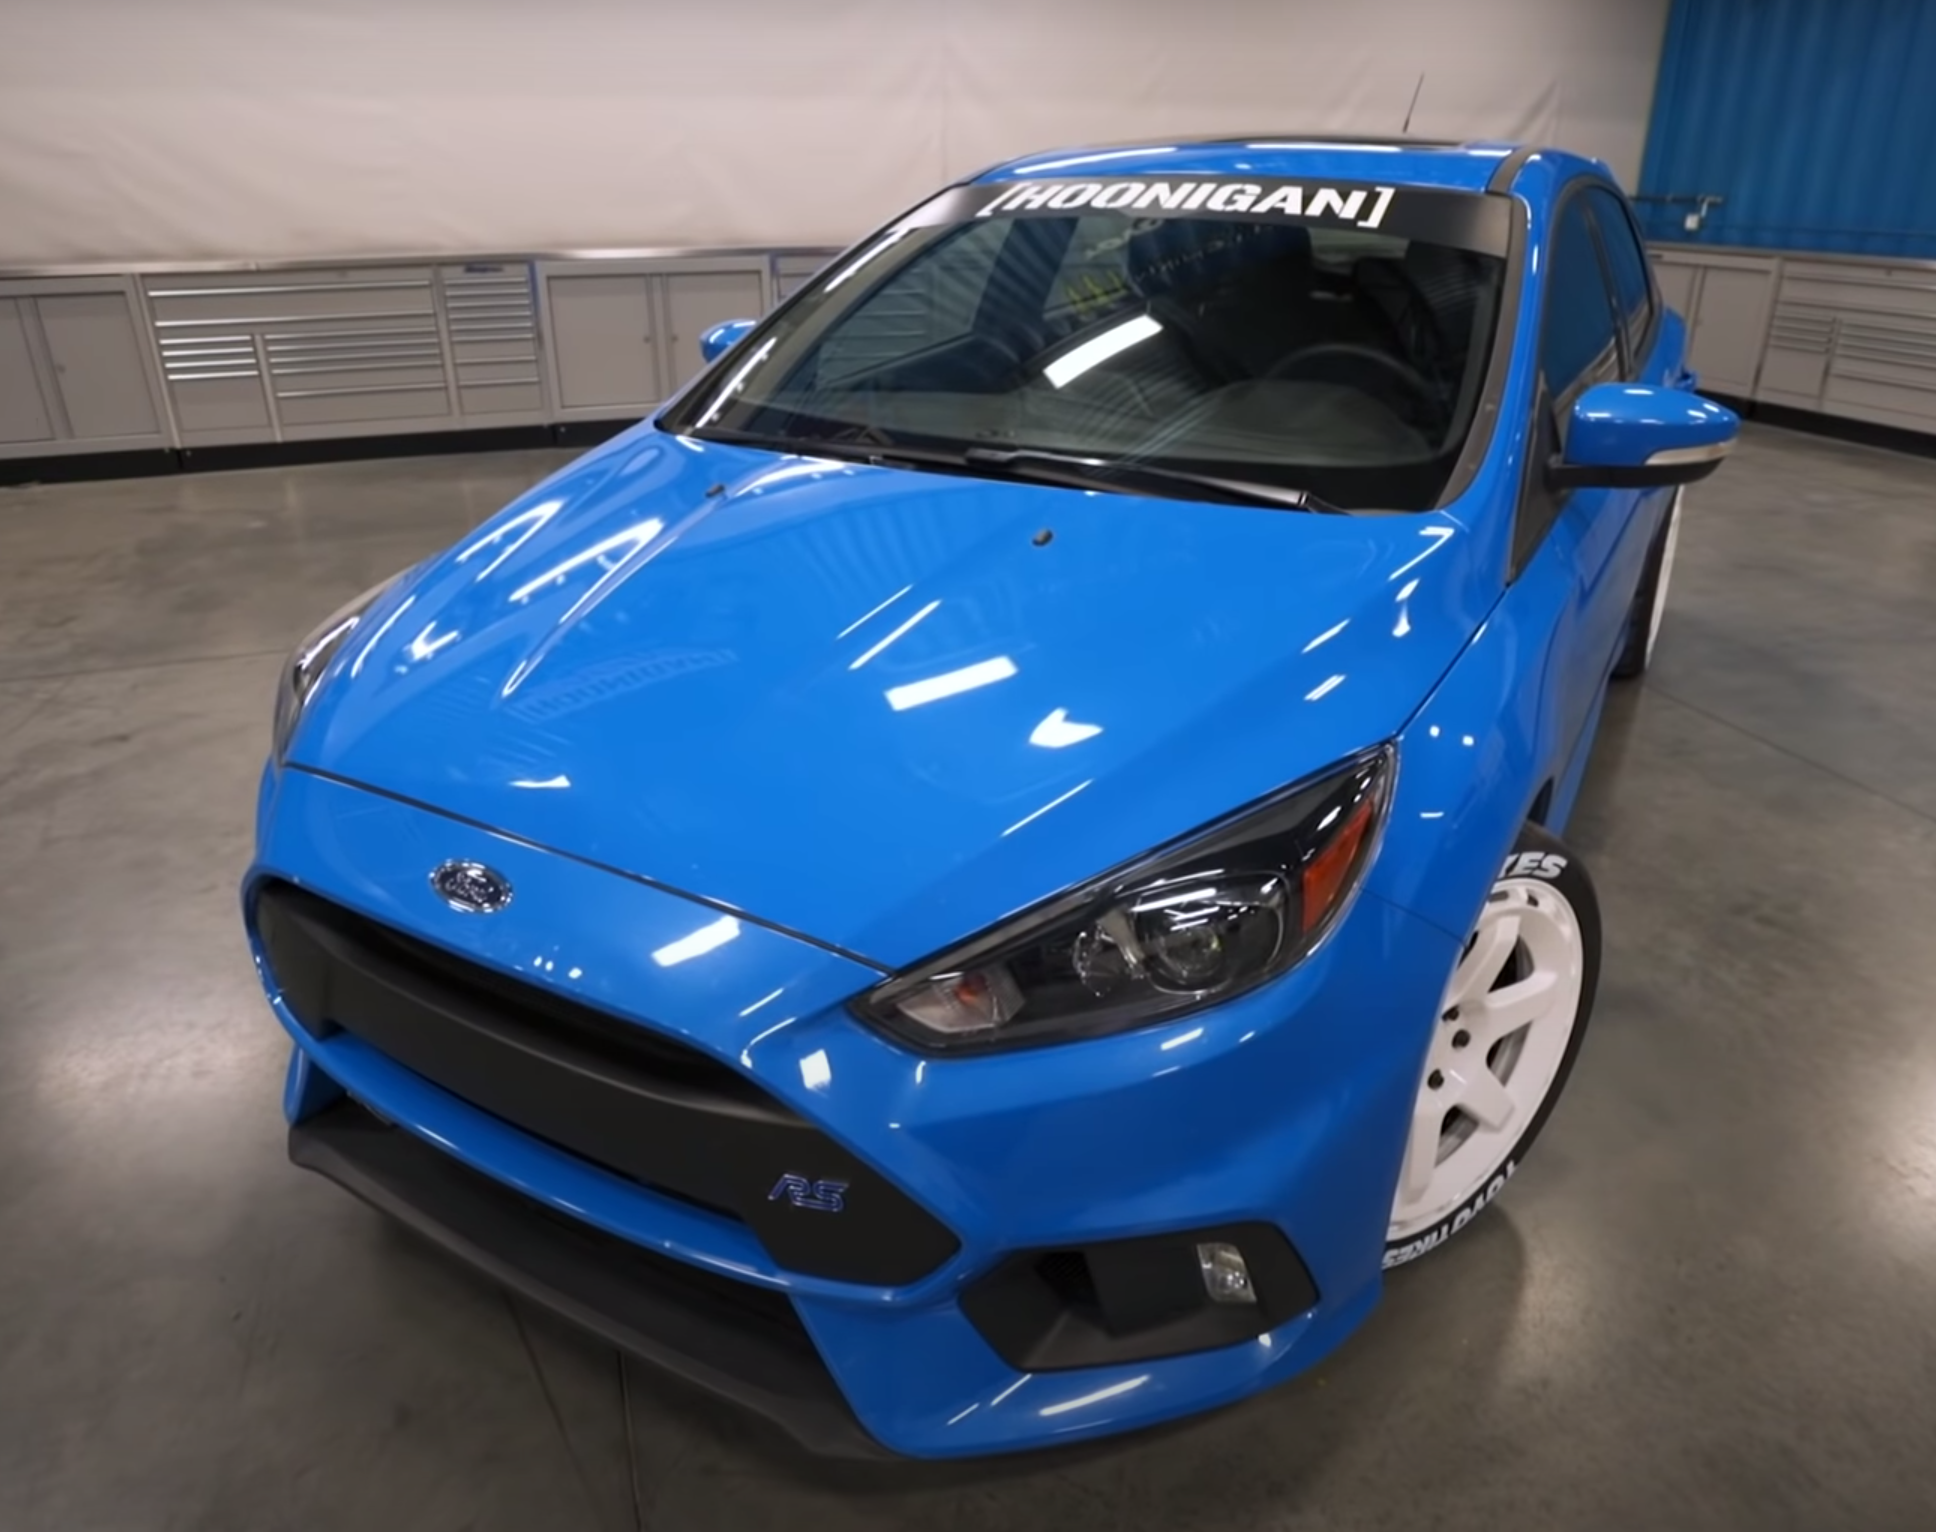 <img src="2016-ford.png" alt="2016 Ford Focus RS">